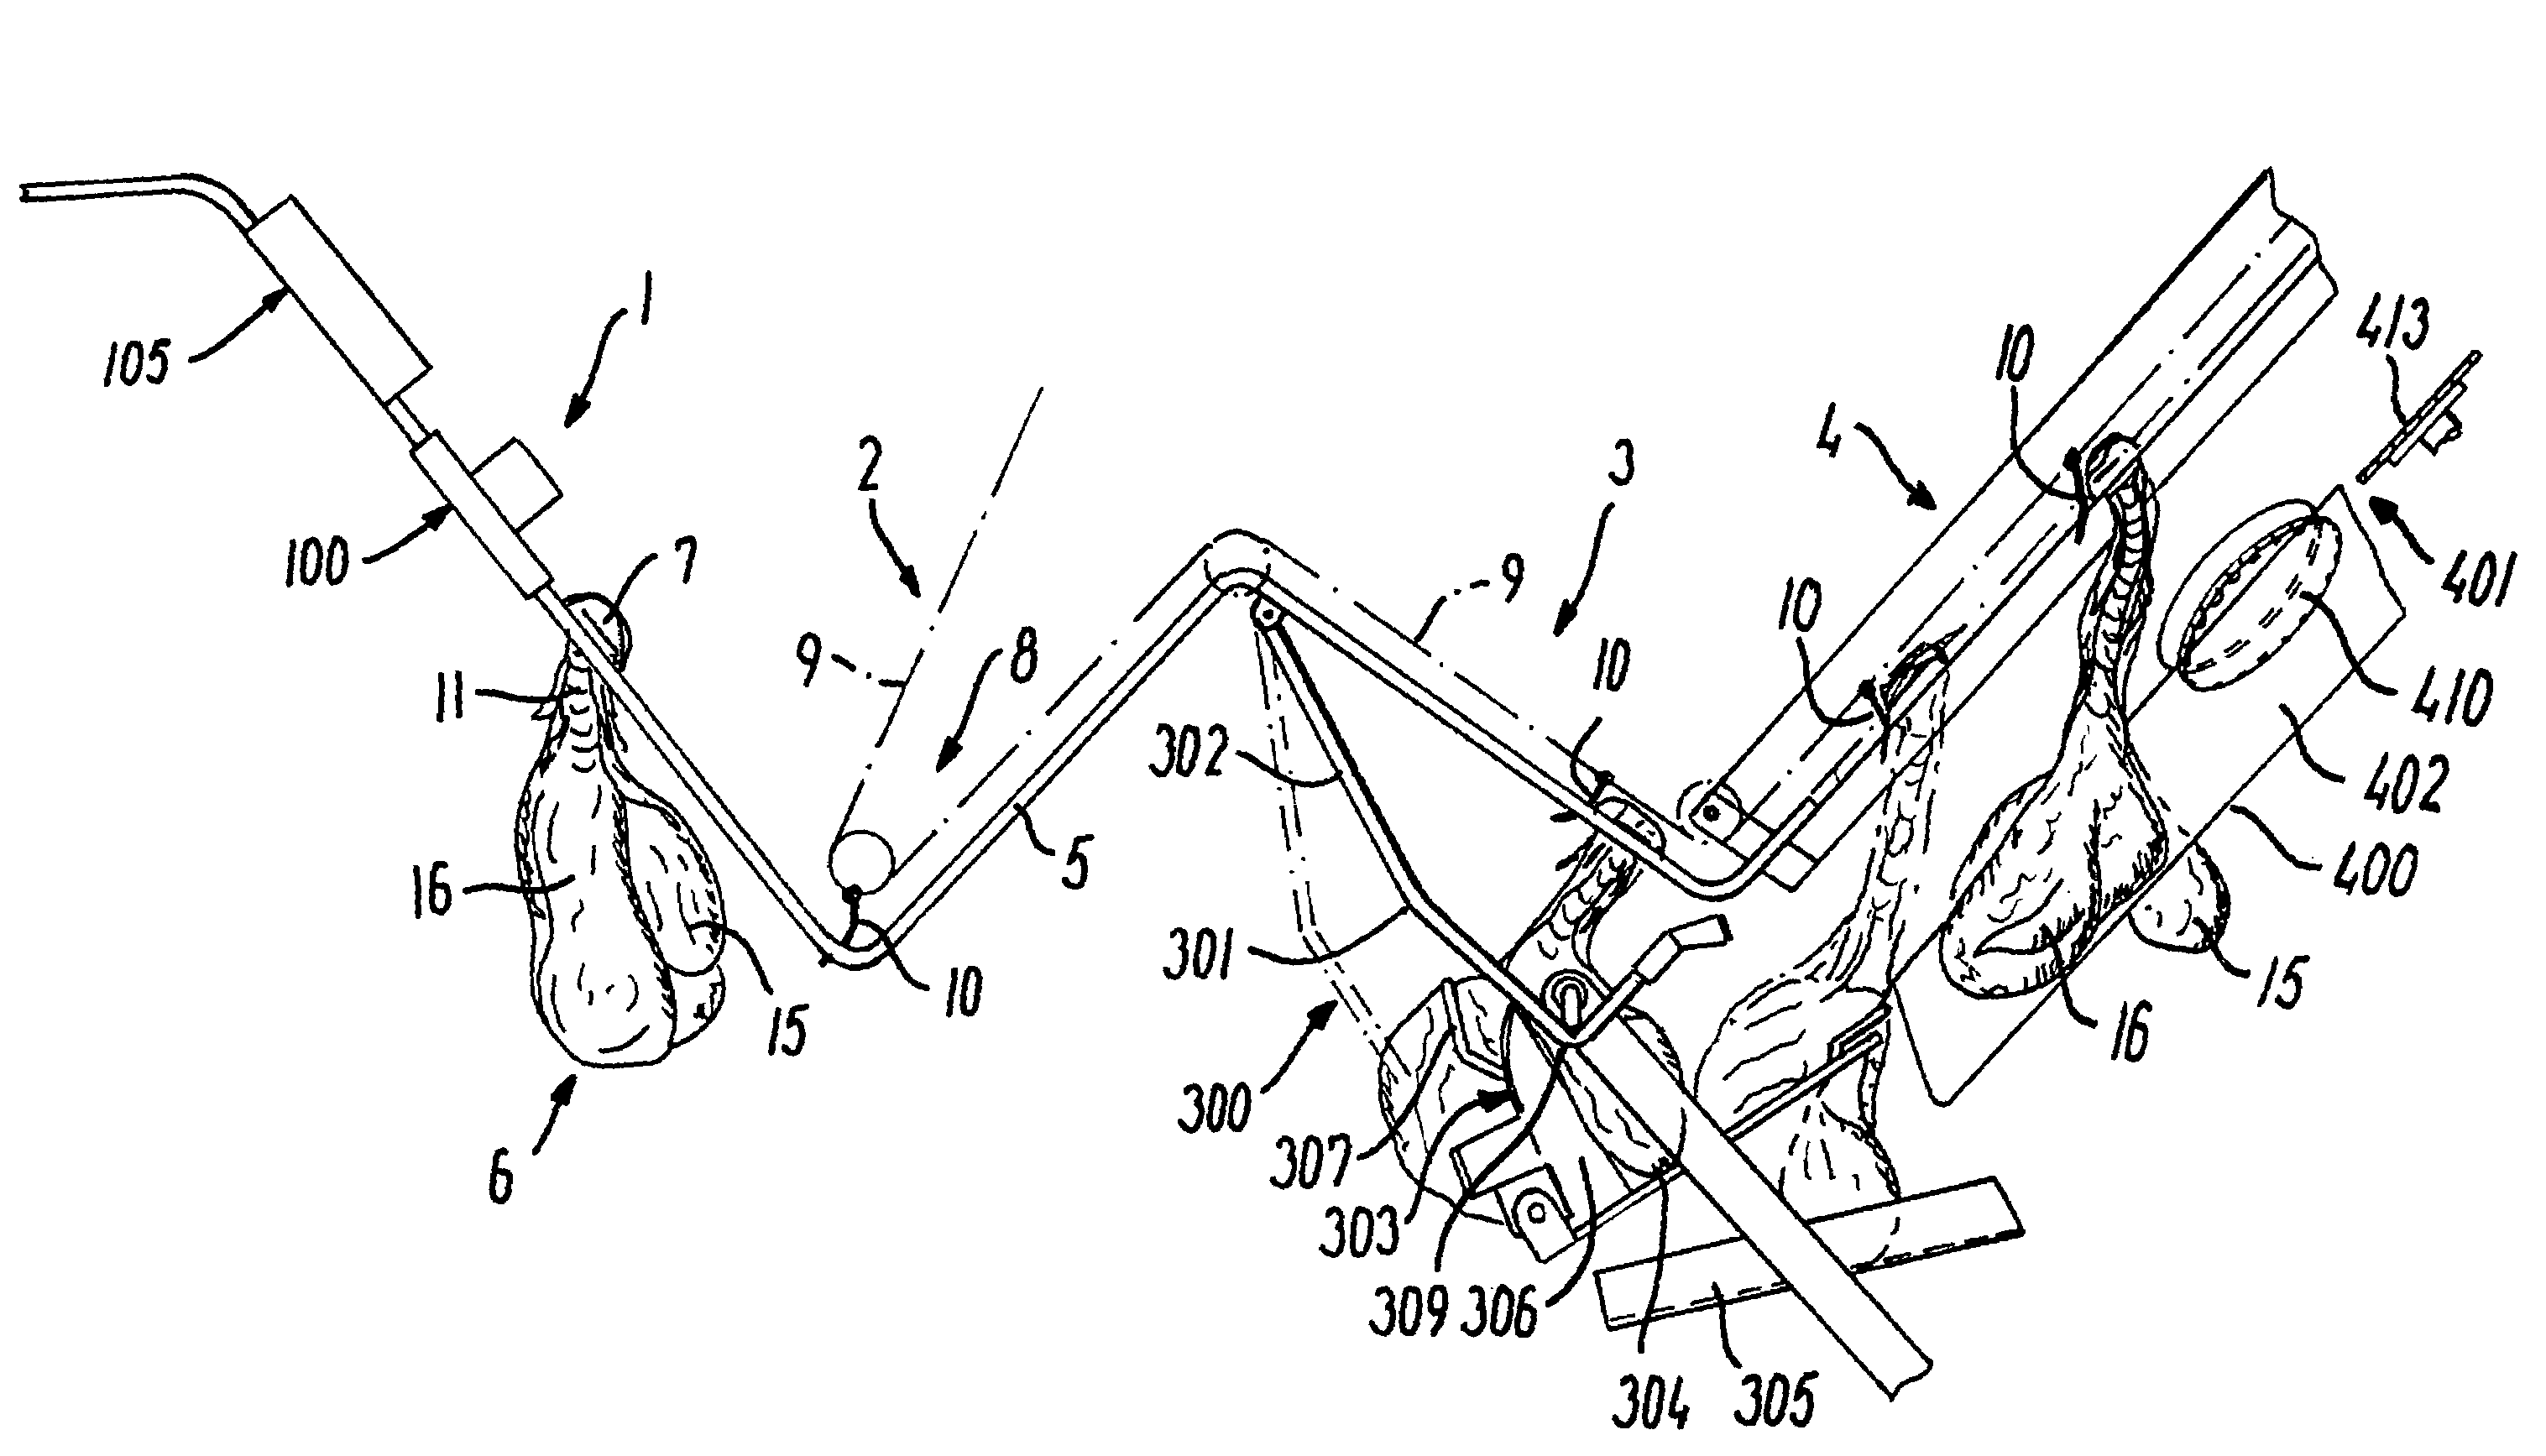 Apparatus and a method for automatic cutting of organs from a plucks set from a carcass